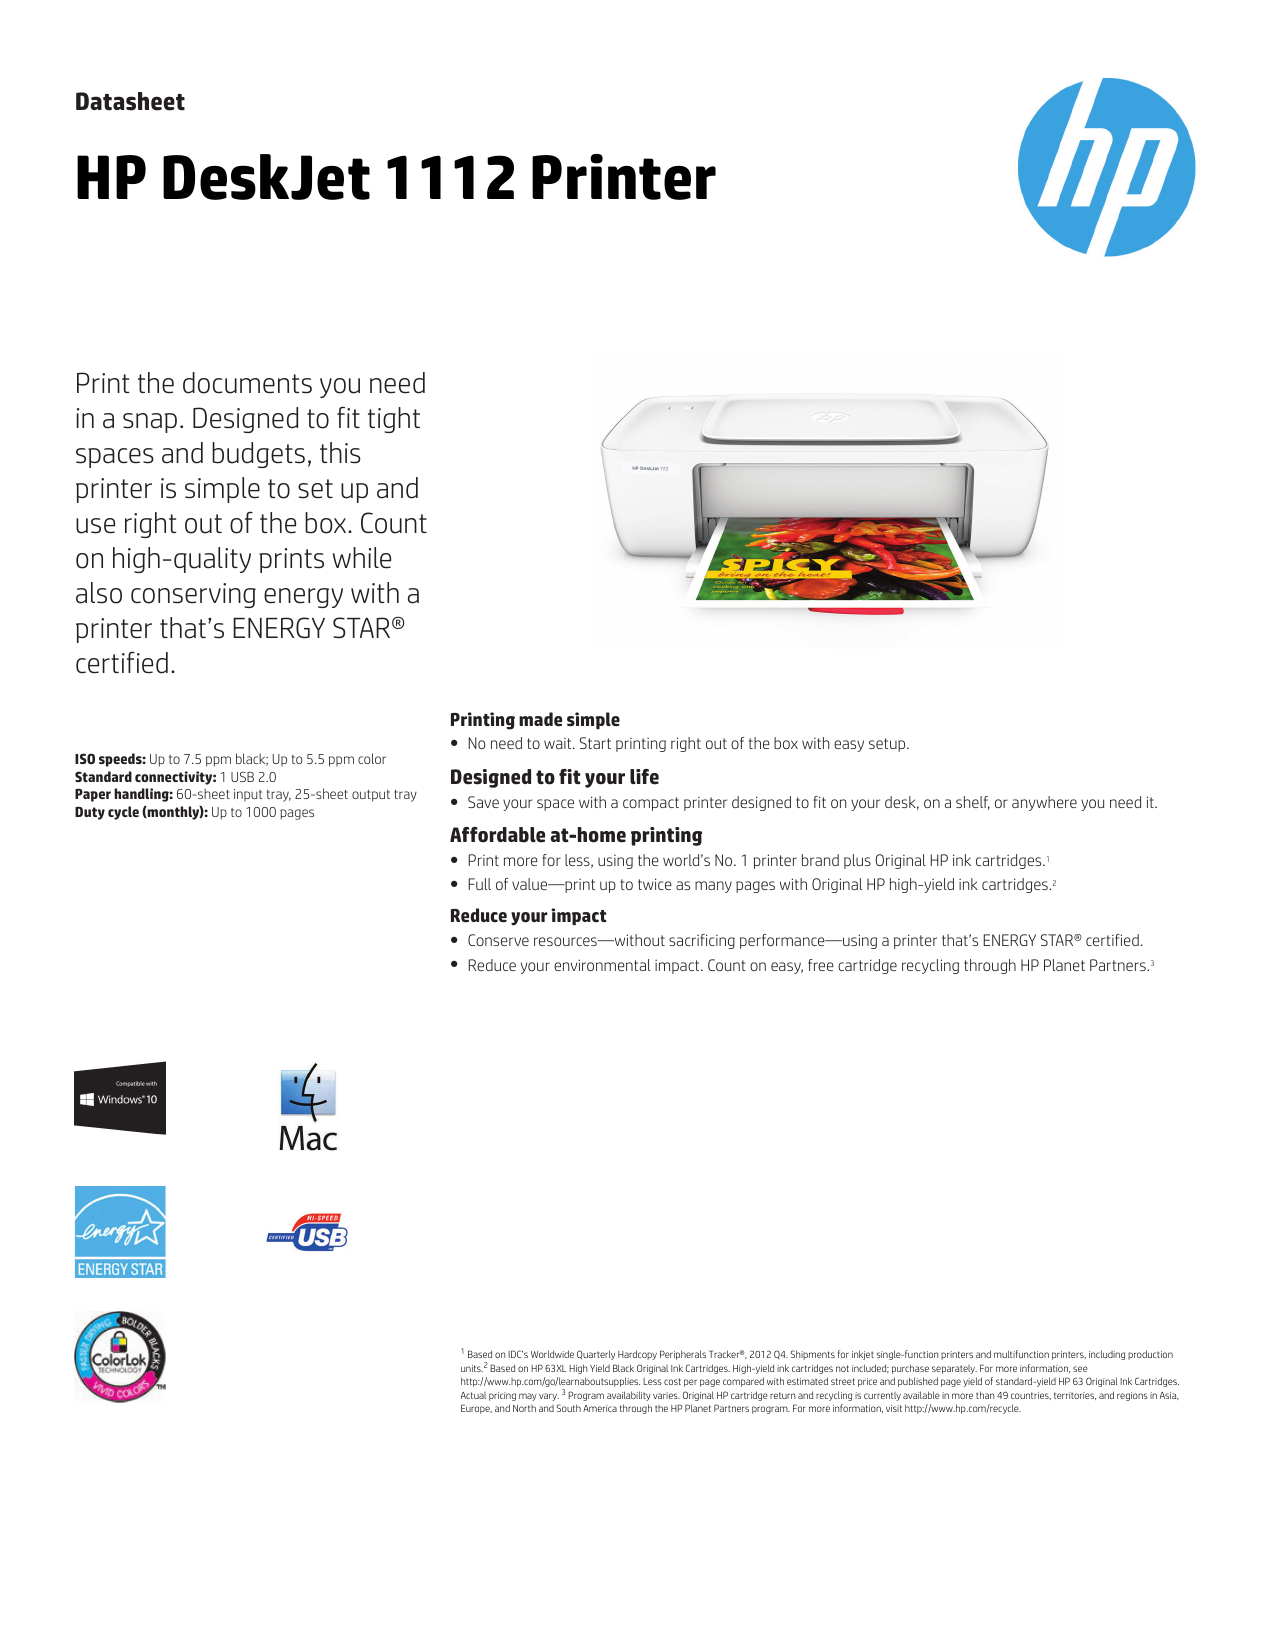 hp customer support software and driver downloads for mac